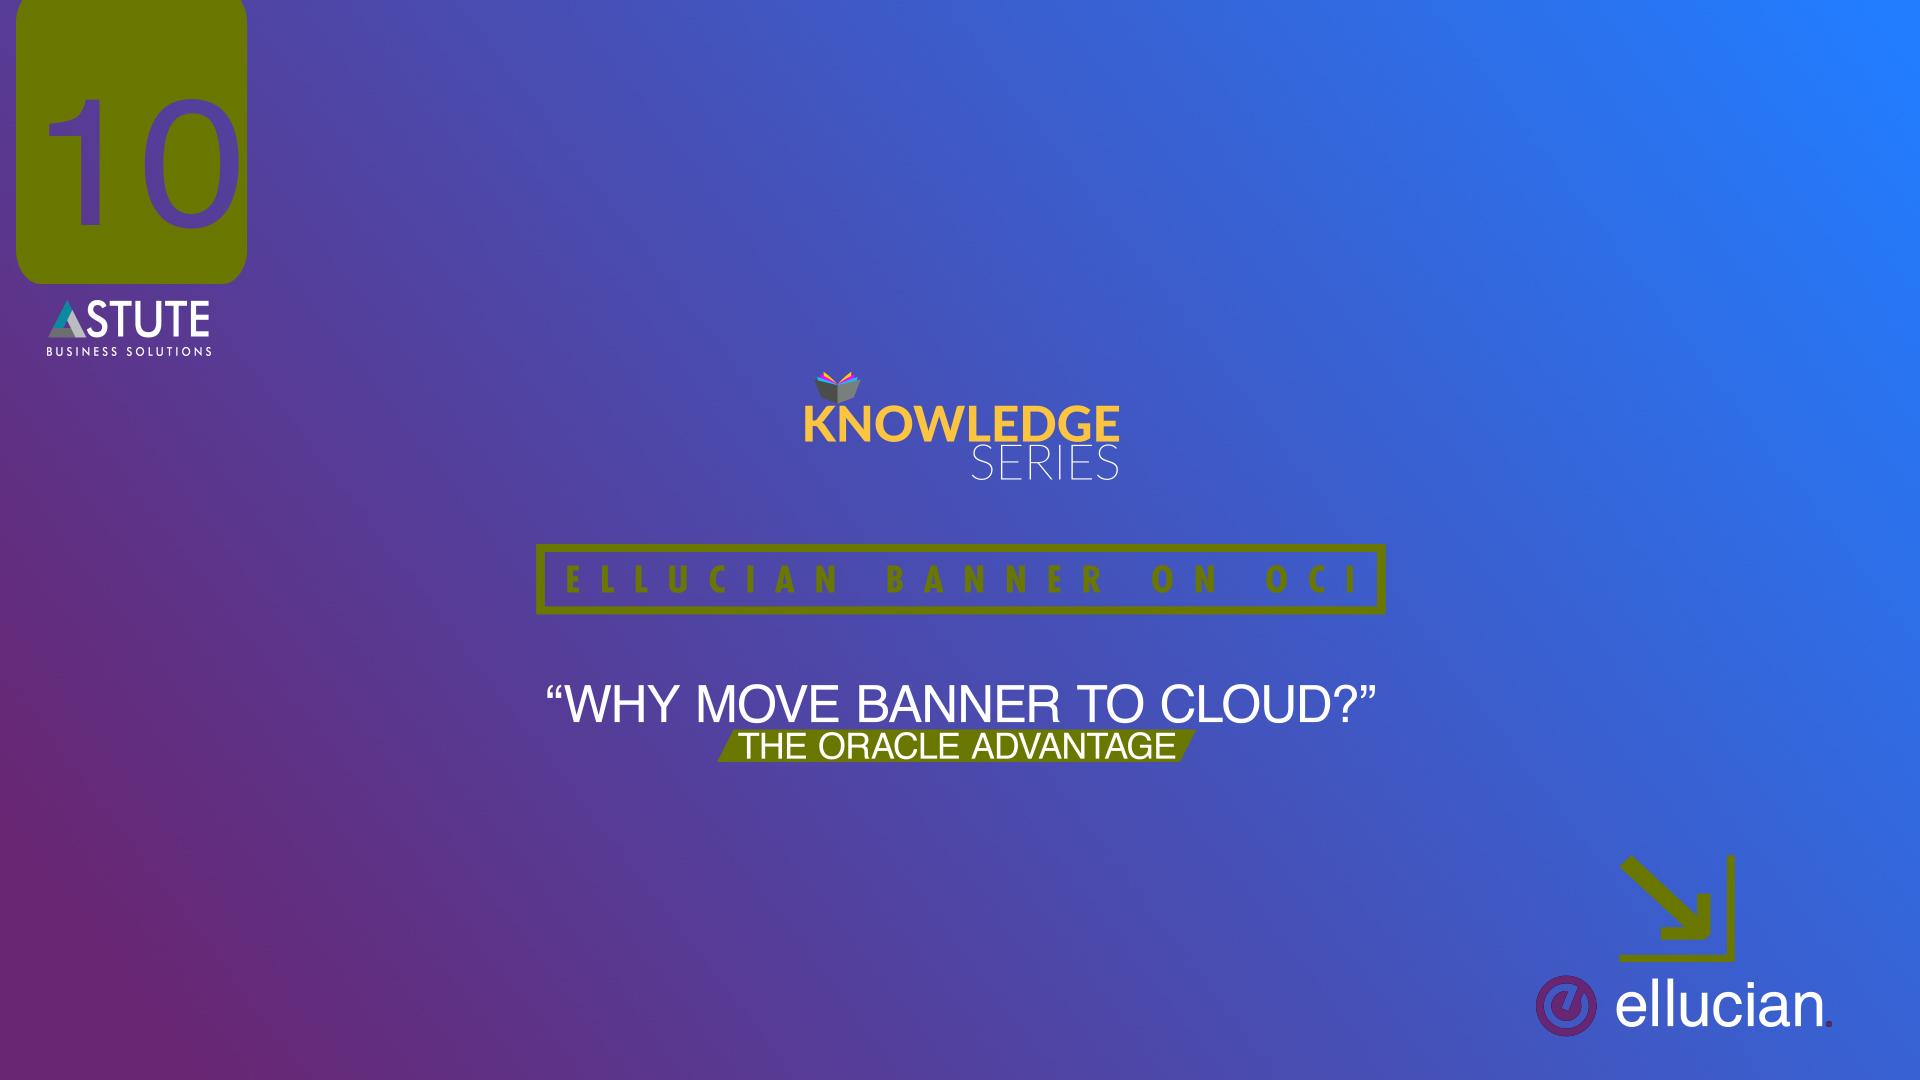 #10 Ellucian _Why Move Banner To Cloud_- The Oracle Advantage